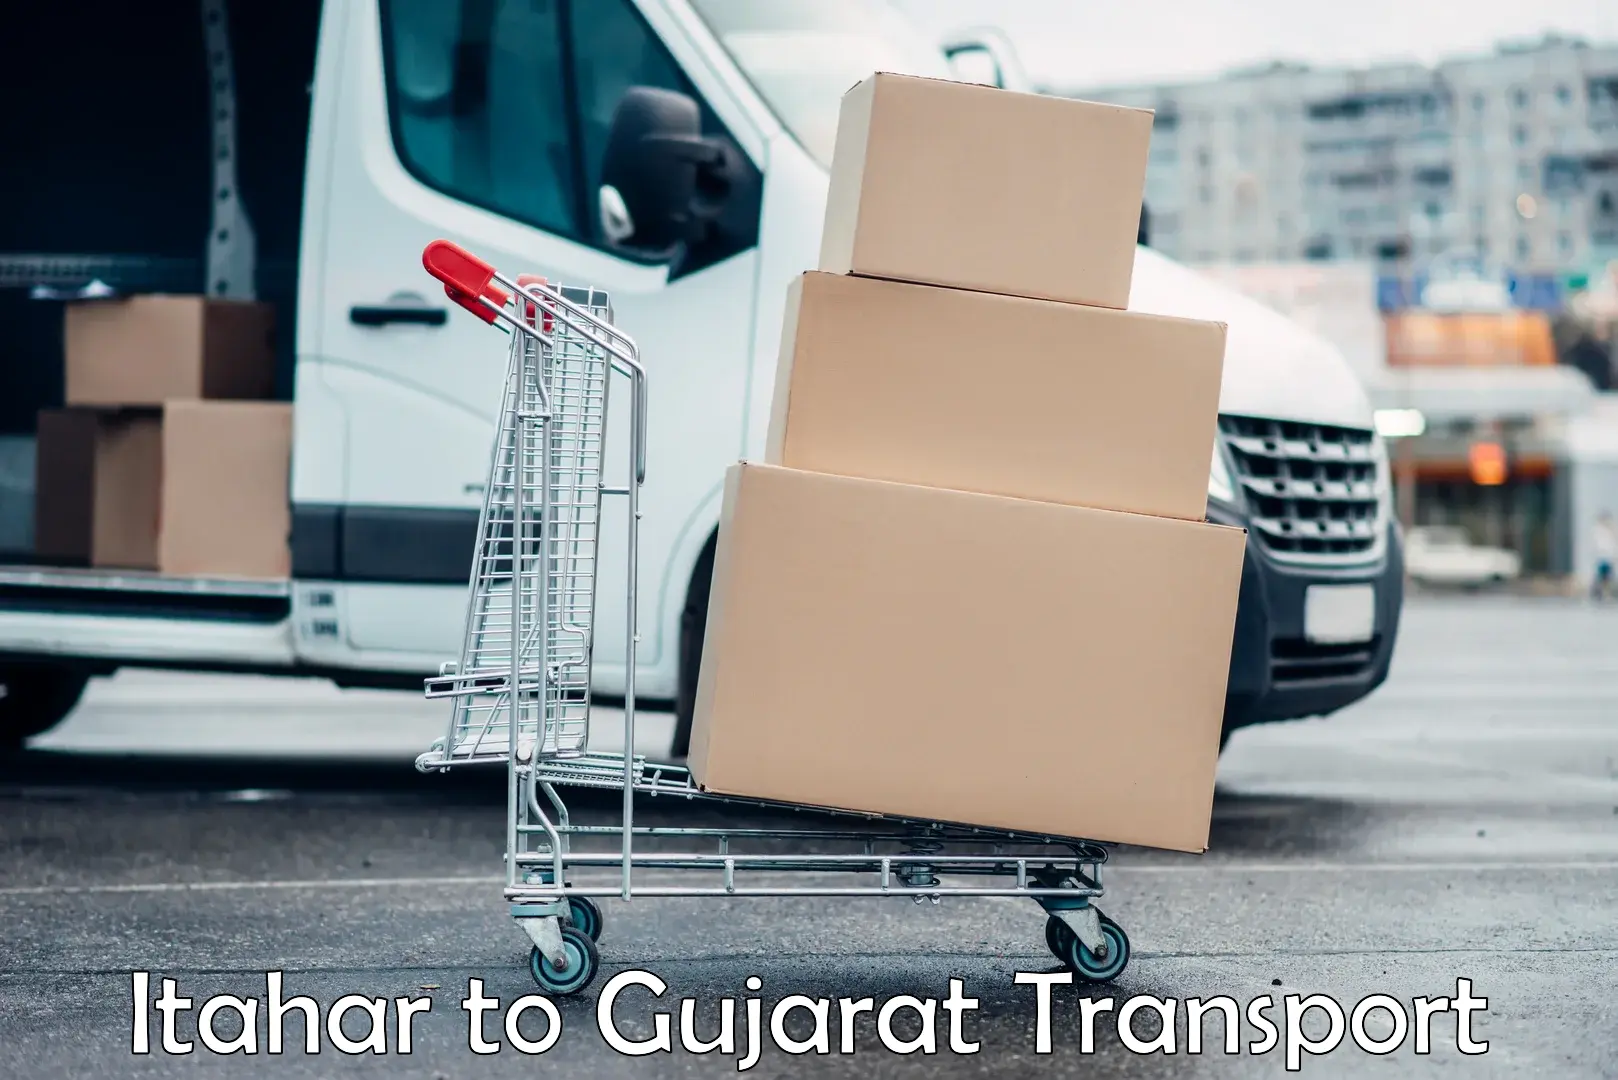 Goods delivery service Itahar to Gujarat